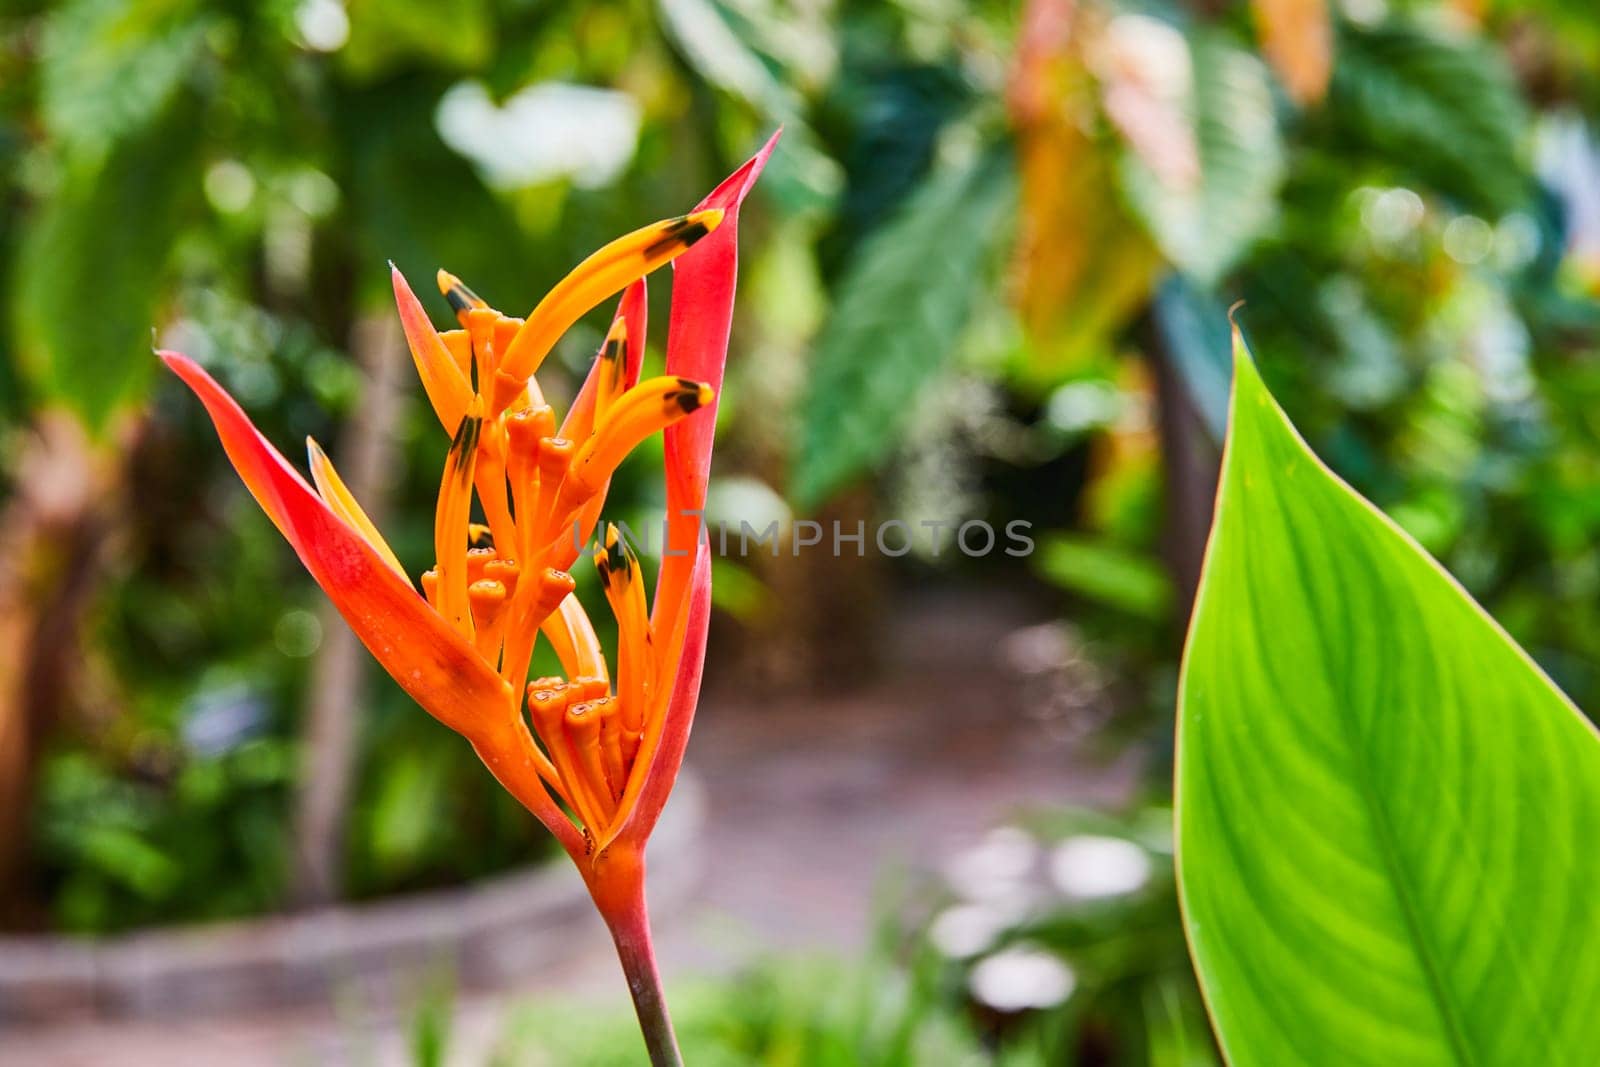 Vibrant Heliconia Flower with Dew Drops in Tropical Garden by njproductions